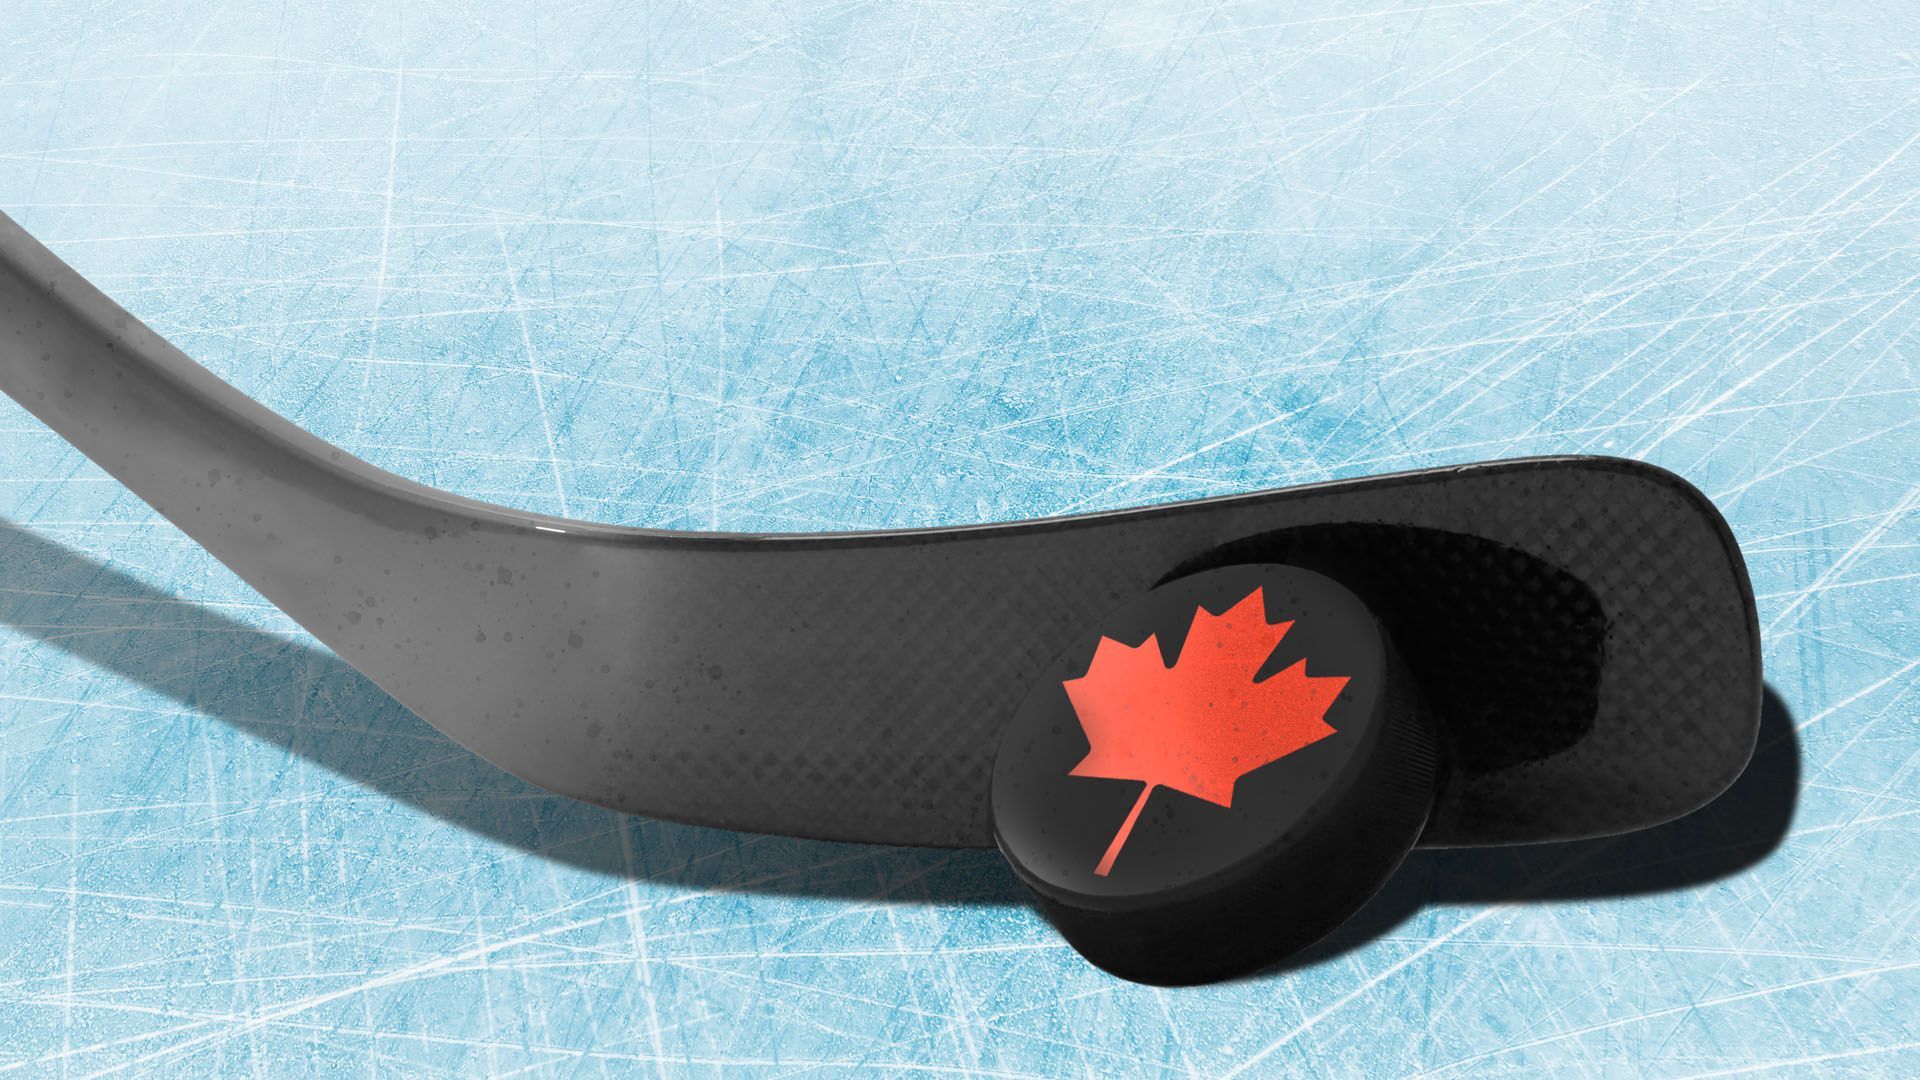 Illustration of a Canadian maple leaf on a hockey puck